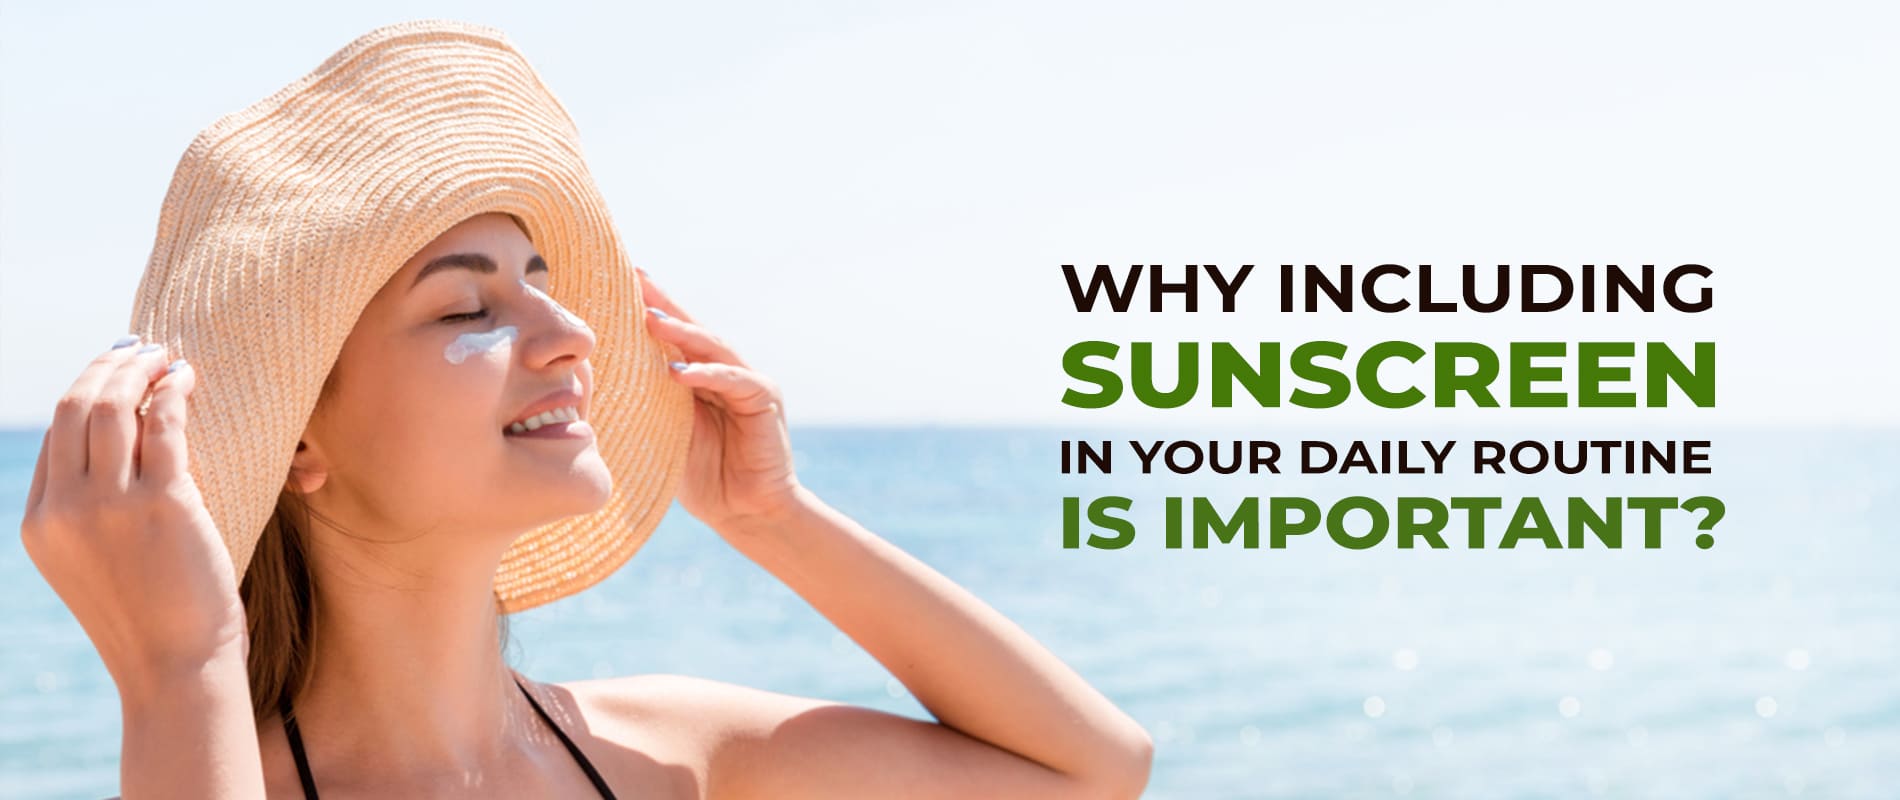 Why Including Sunscreen In Your Daily Routine Is Important?